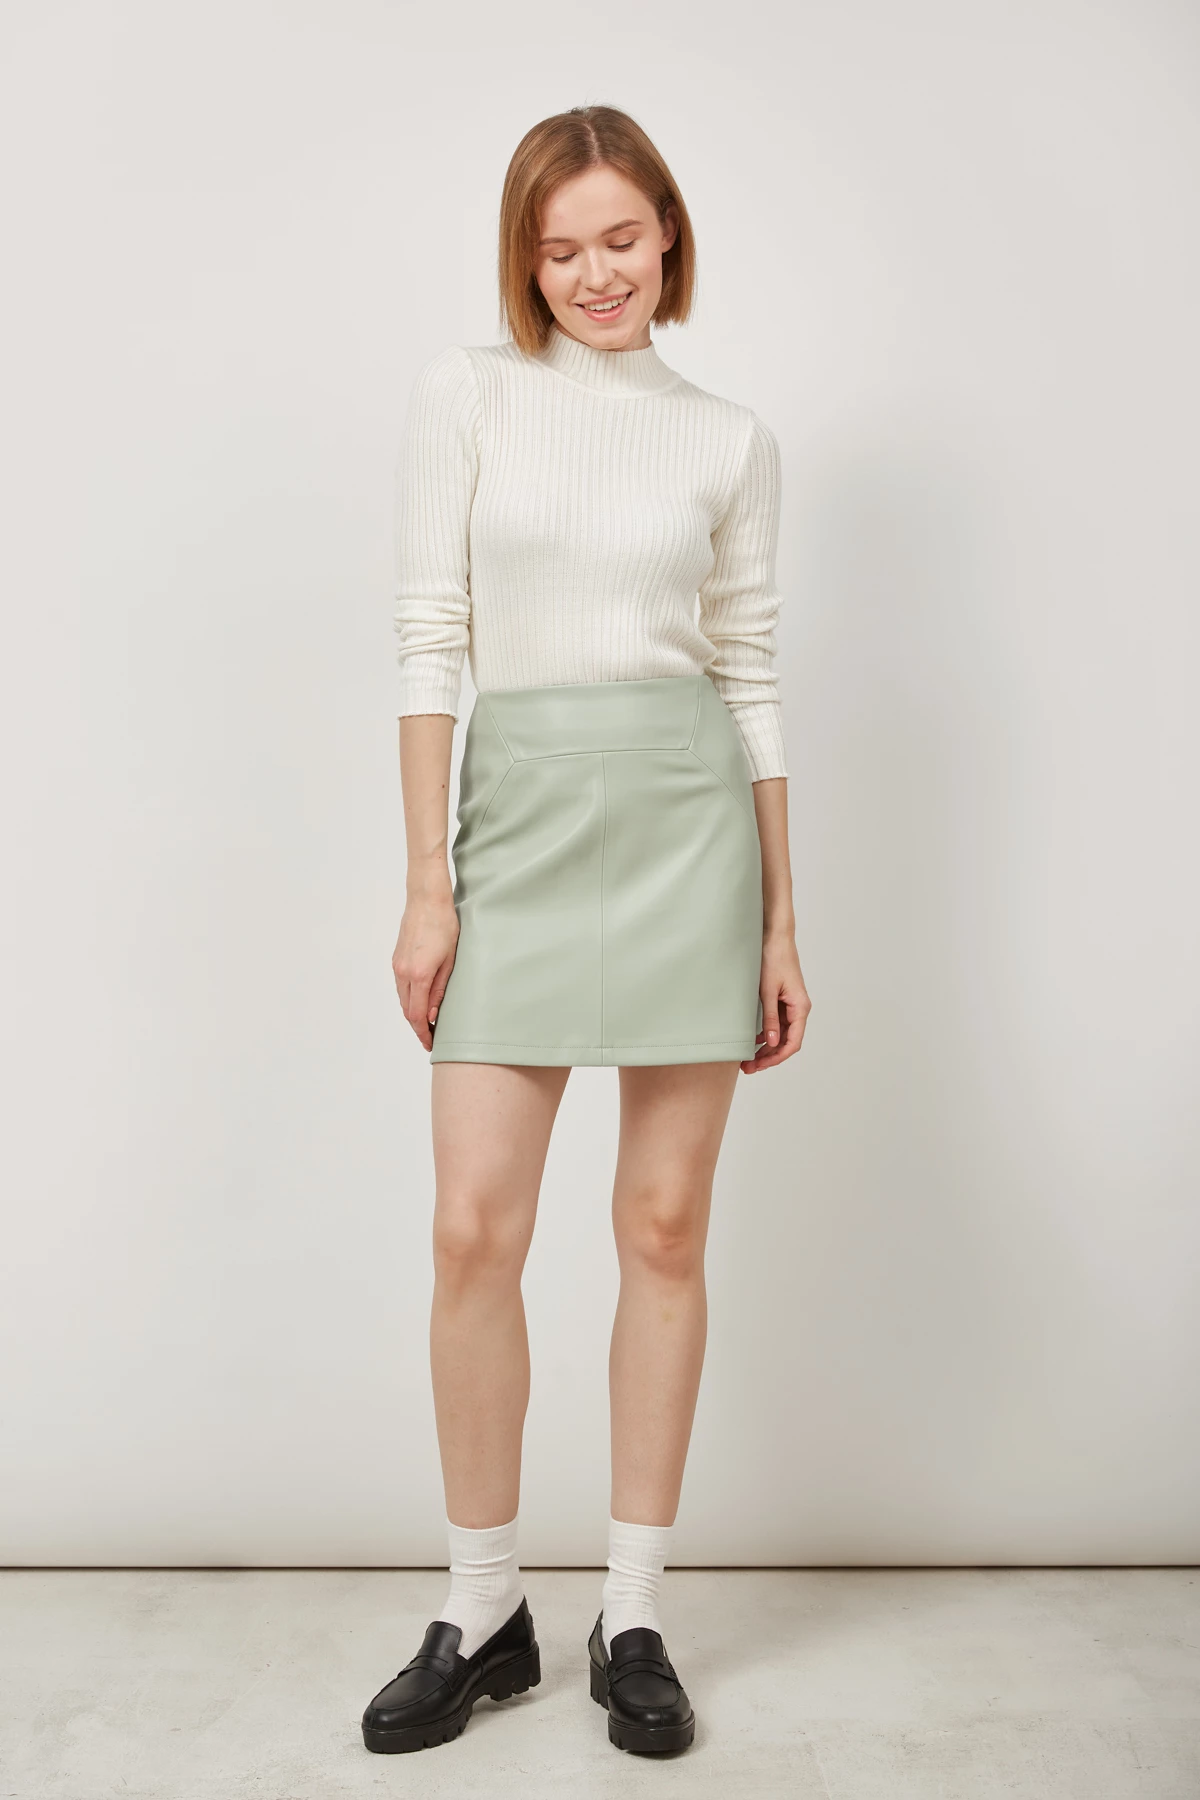 Short skirt in mint eco-leather, photo 1